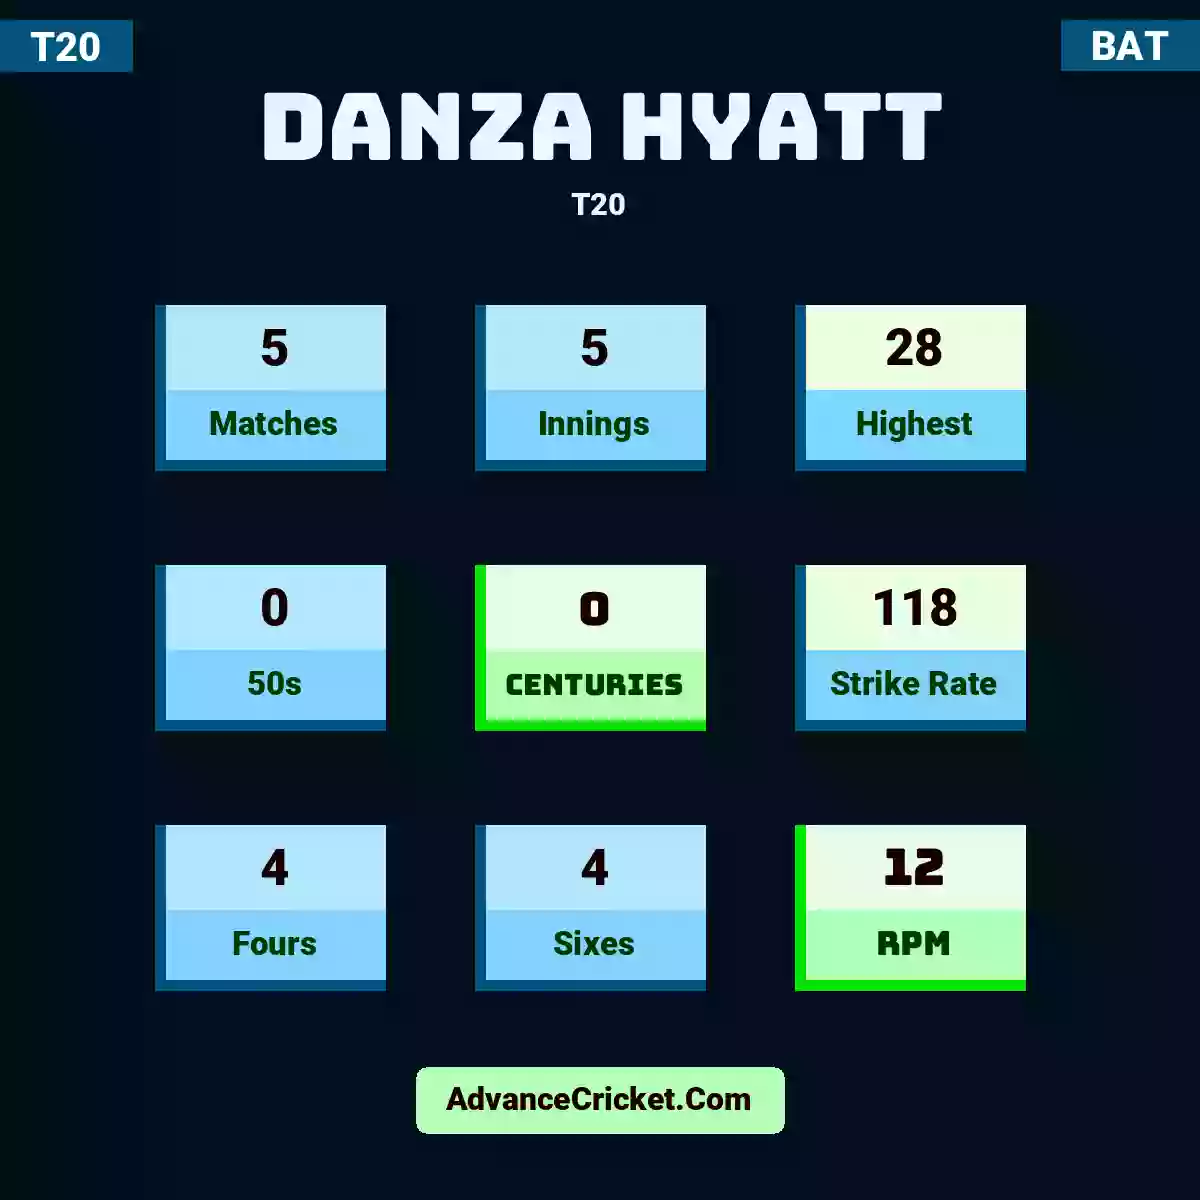 Danza Hyatt T20 , Danza Hyatt played 5 matches, scored 28 runs as highest, 0 half-centuries, and 0 centuries, with a strike rate of 118. D.Hyatt hit 4 fours and 4 sixes, with an RPM of 12.